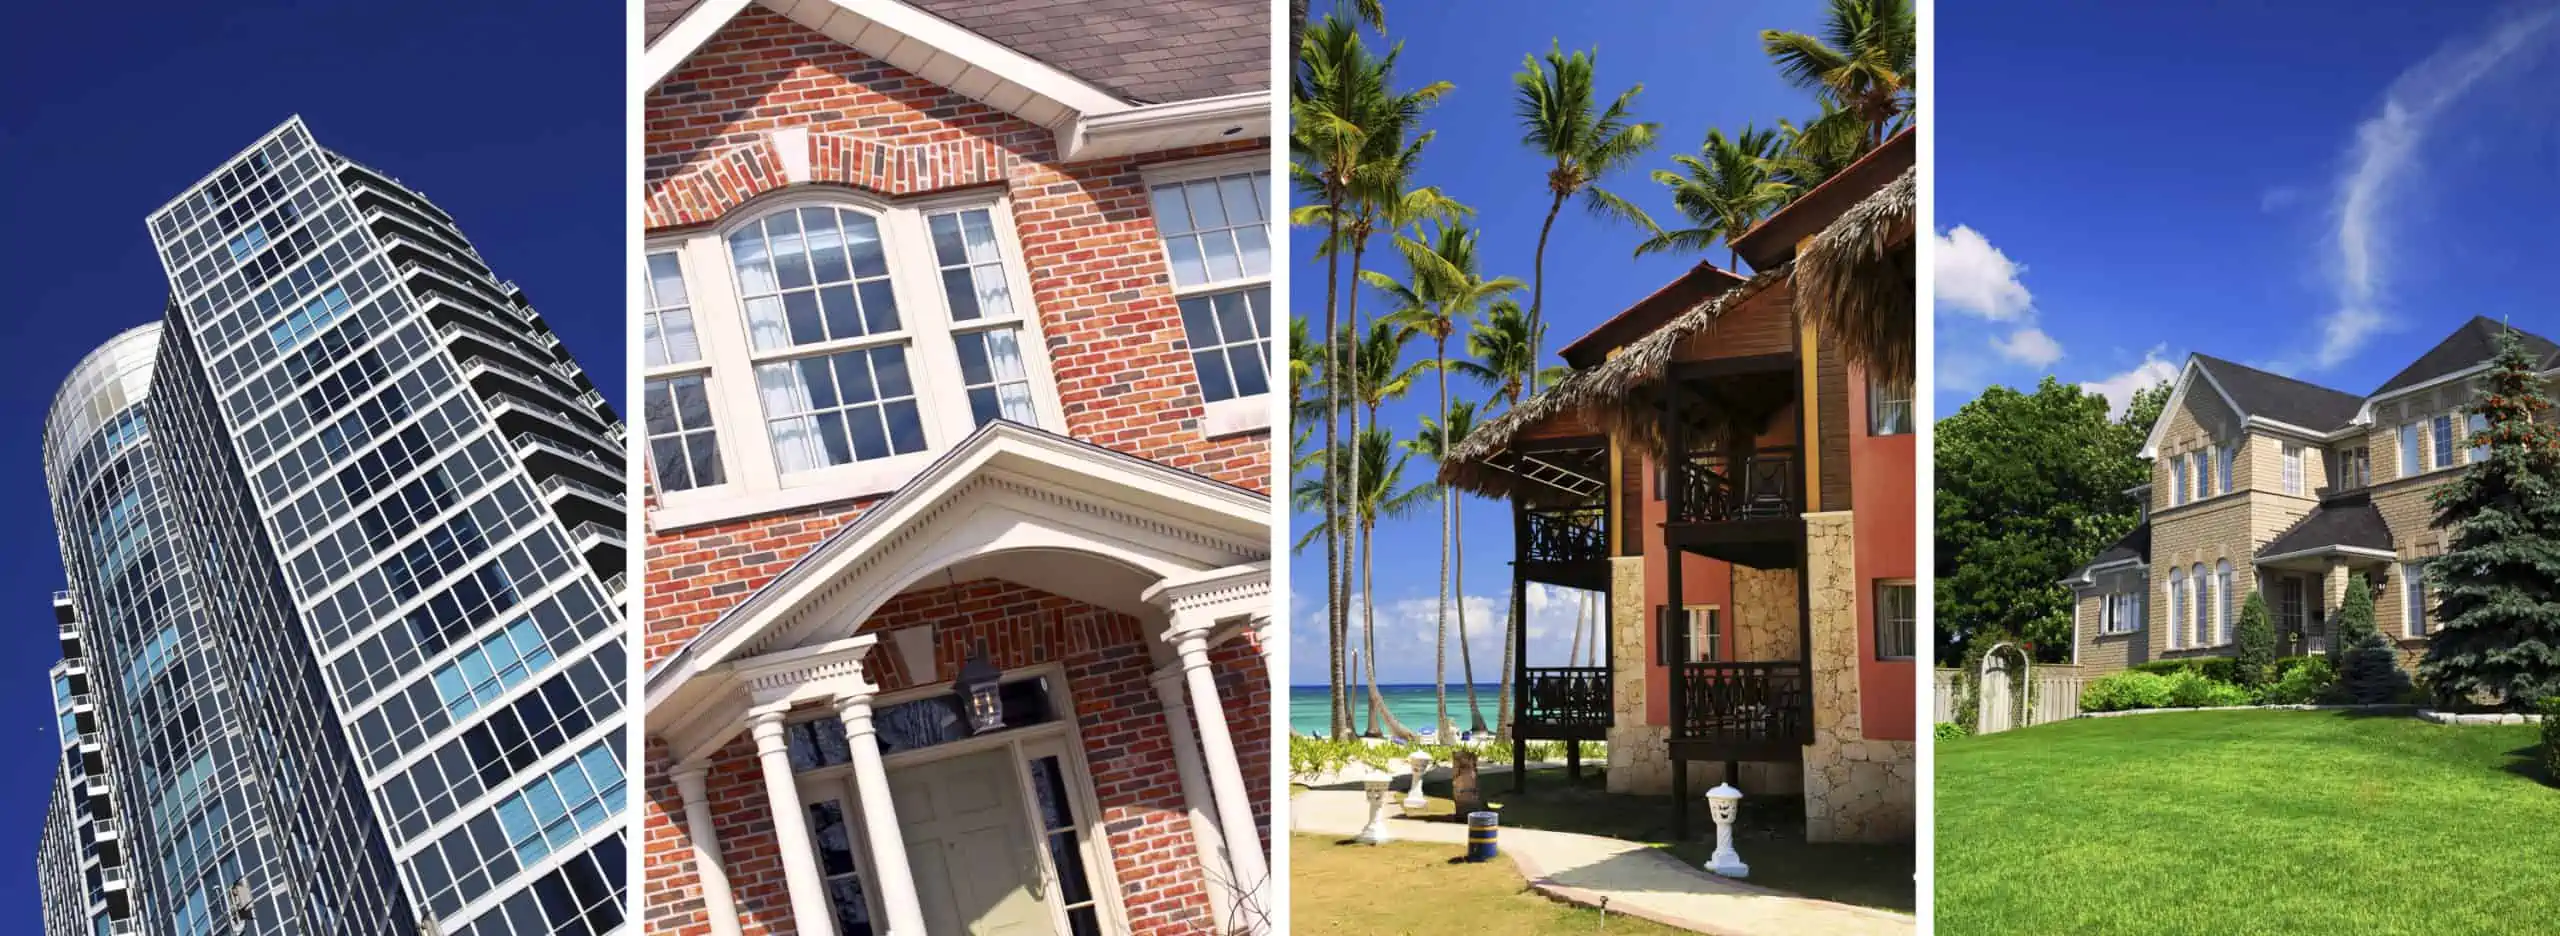 Different types of homes to choose from when deciding to rent vs. buy.